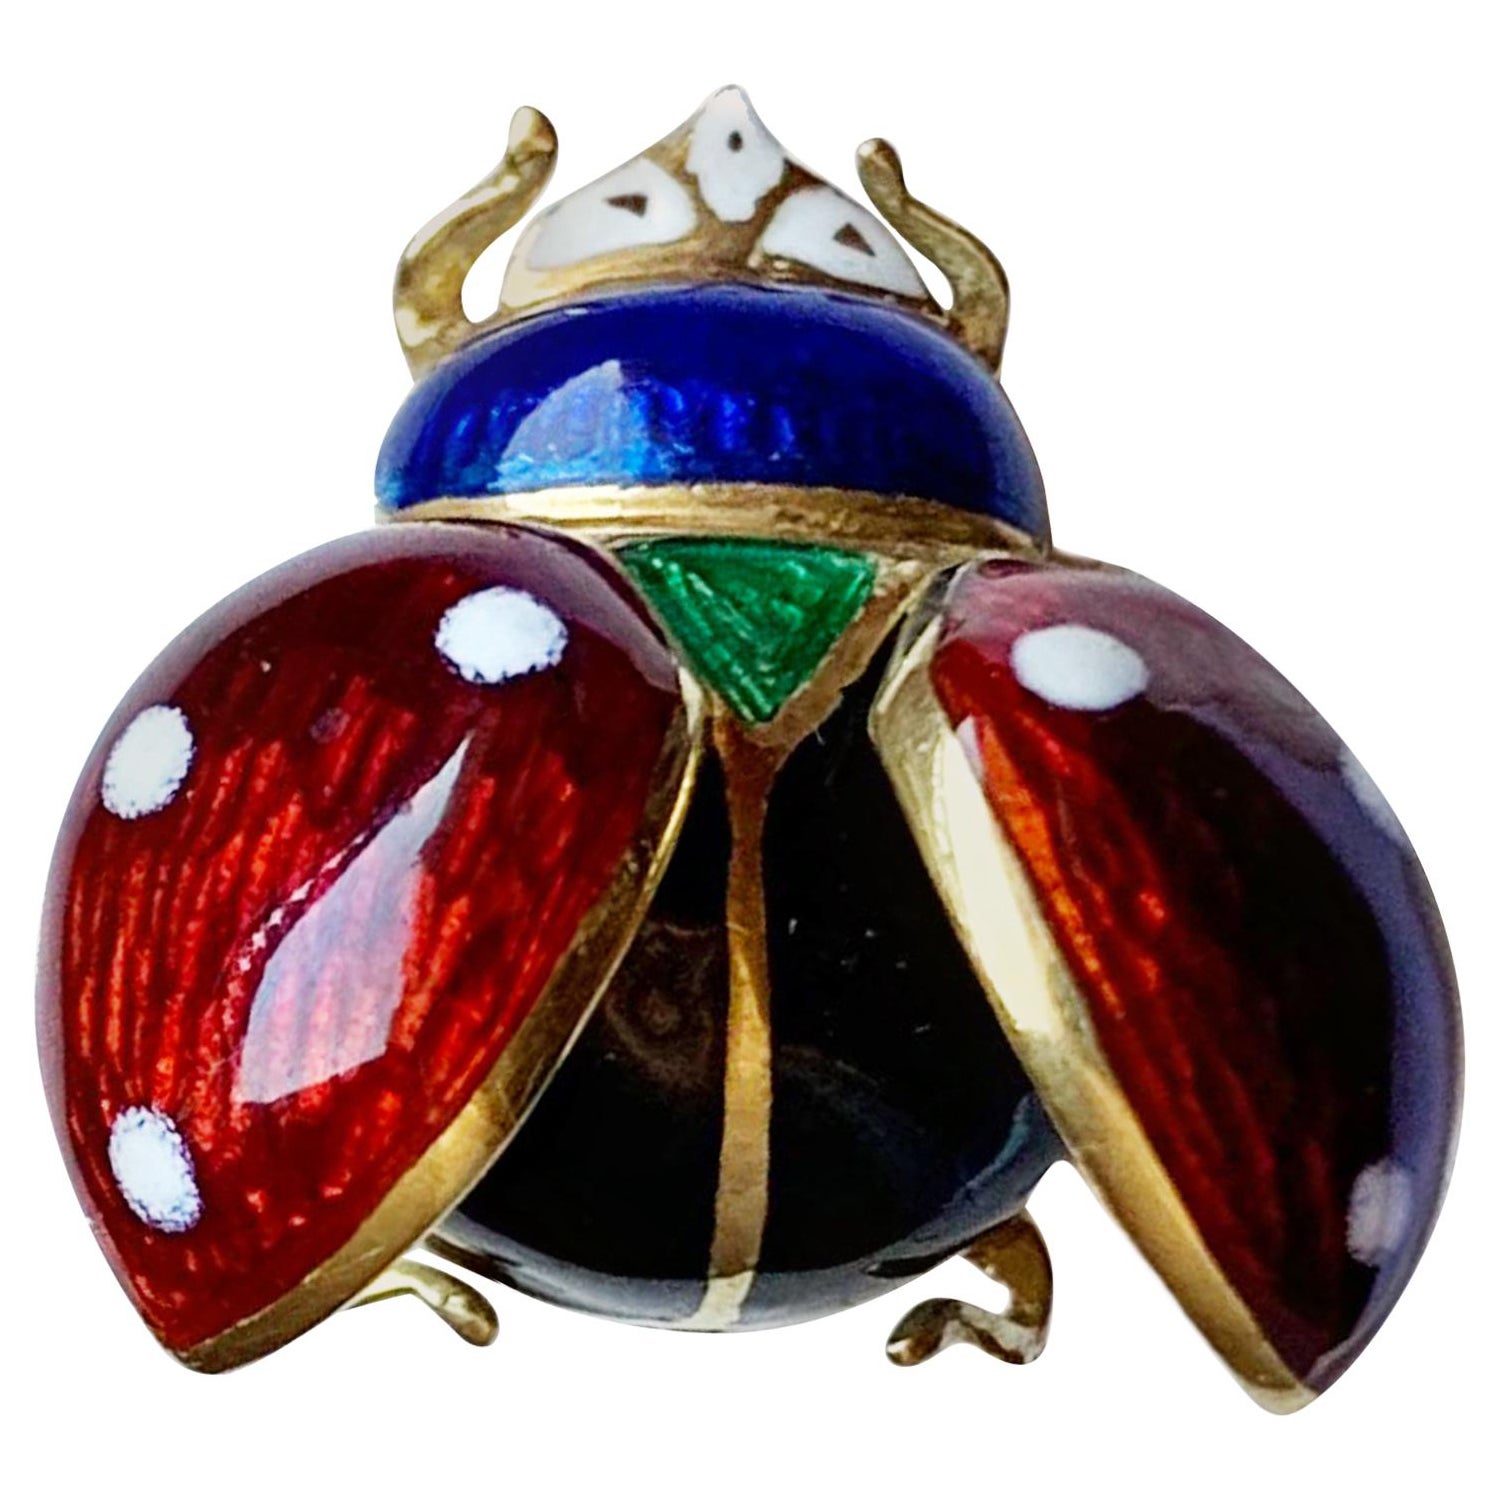 Vintage 18 Karat Gold and Enamel Brooch Depicting a Ladybug with Open Wings For Sale